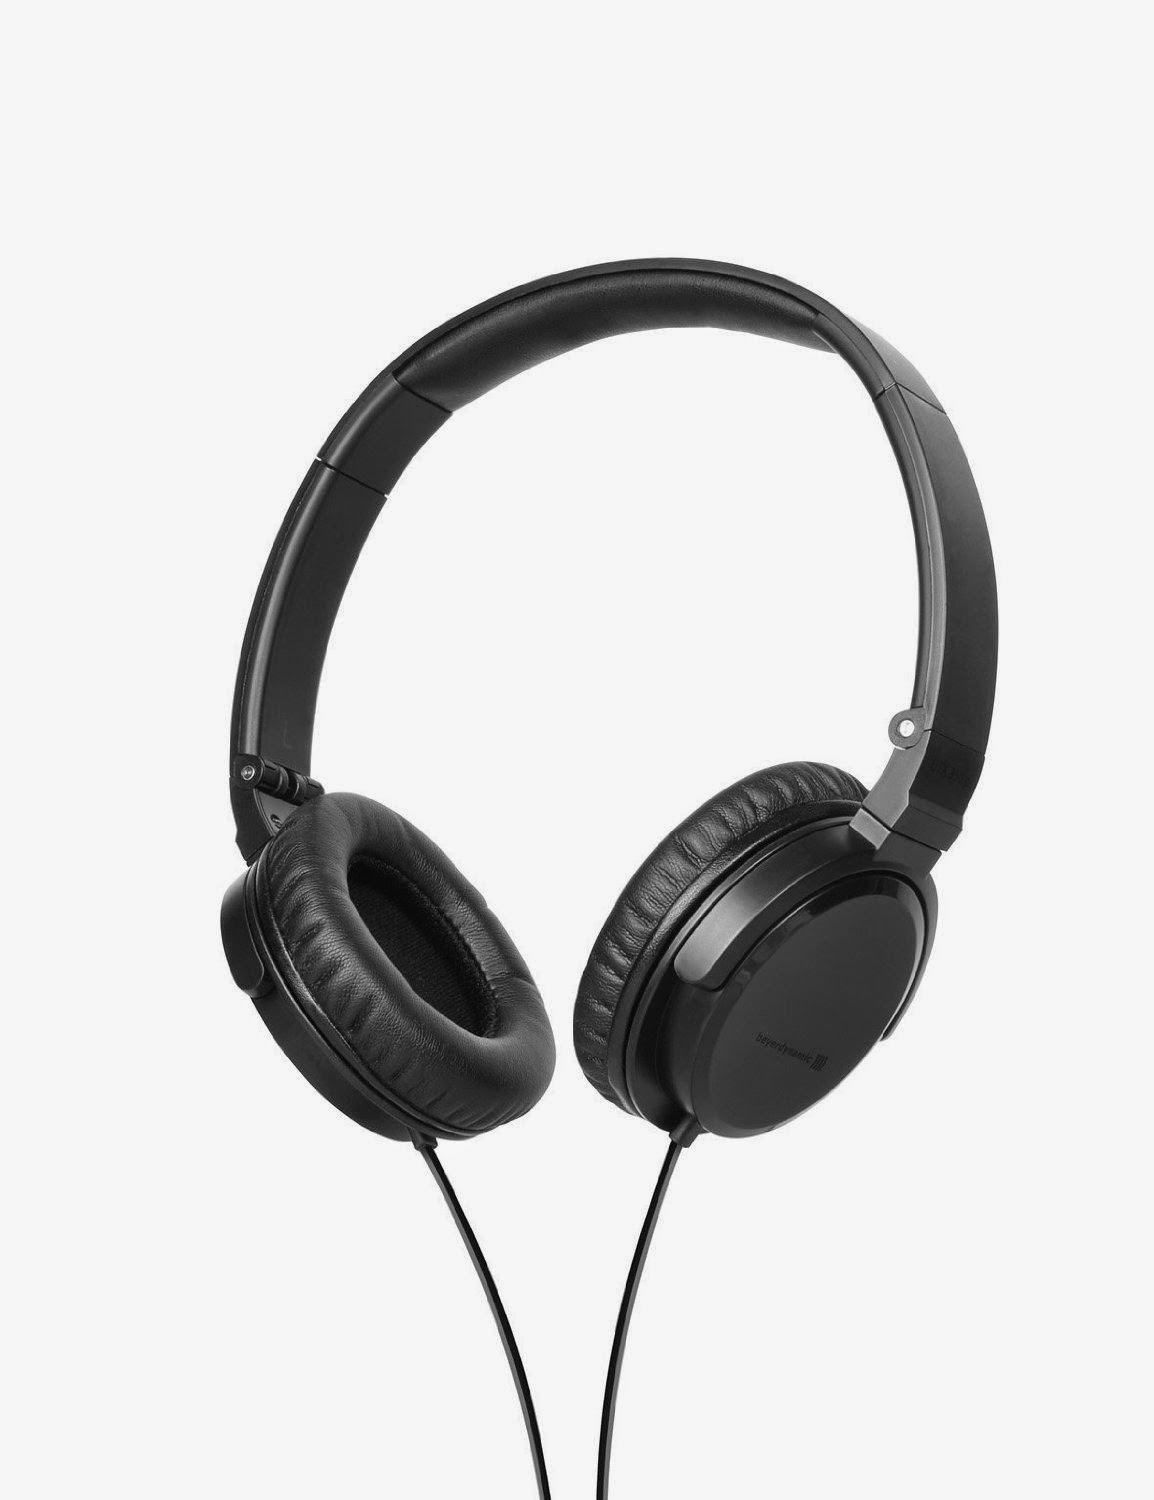 Best Beyerdynamic 715875 DTX 350p Headphone, Black On Sale Now, Mobile Sound With The Proper Comfort